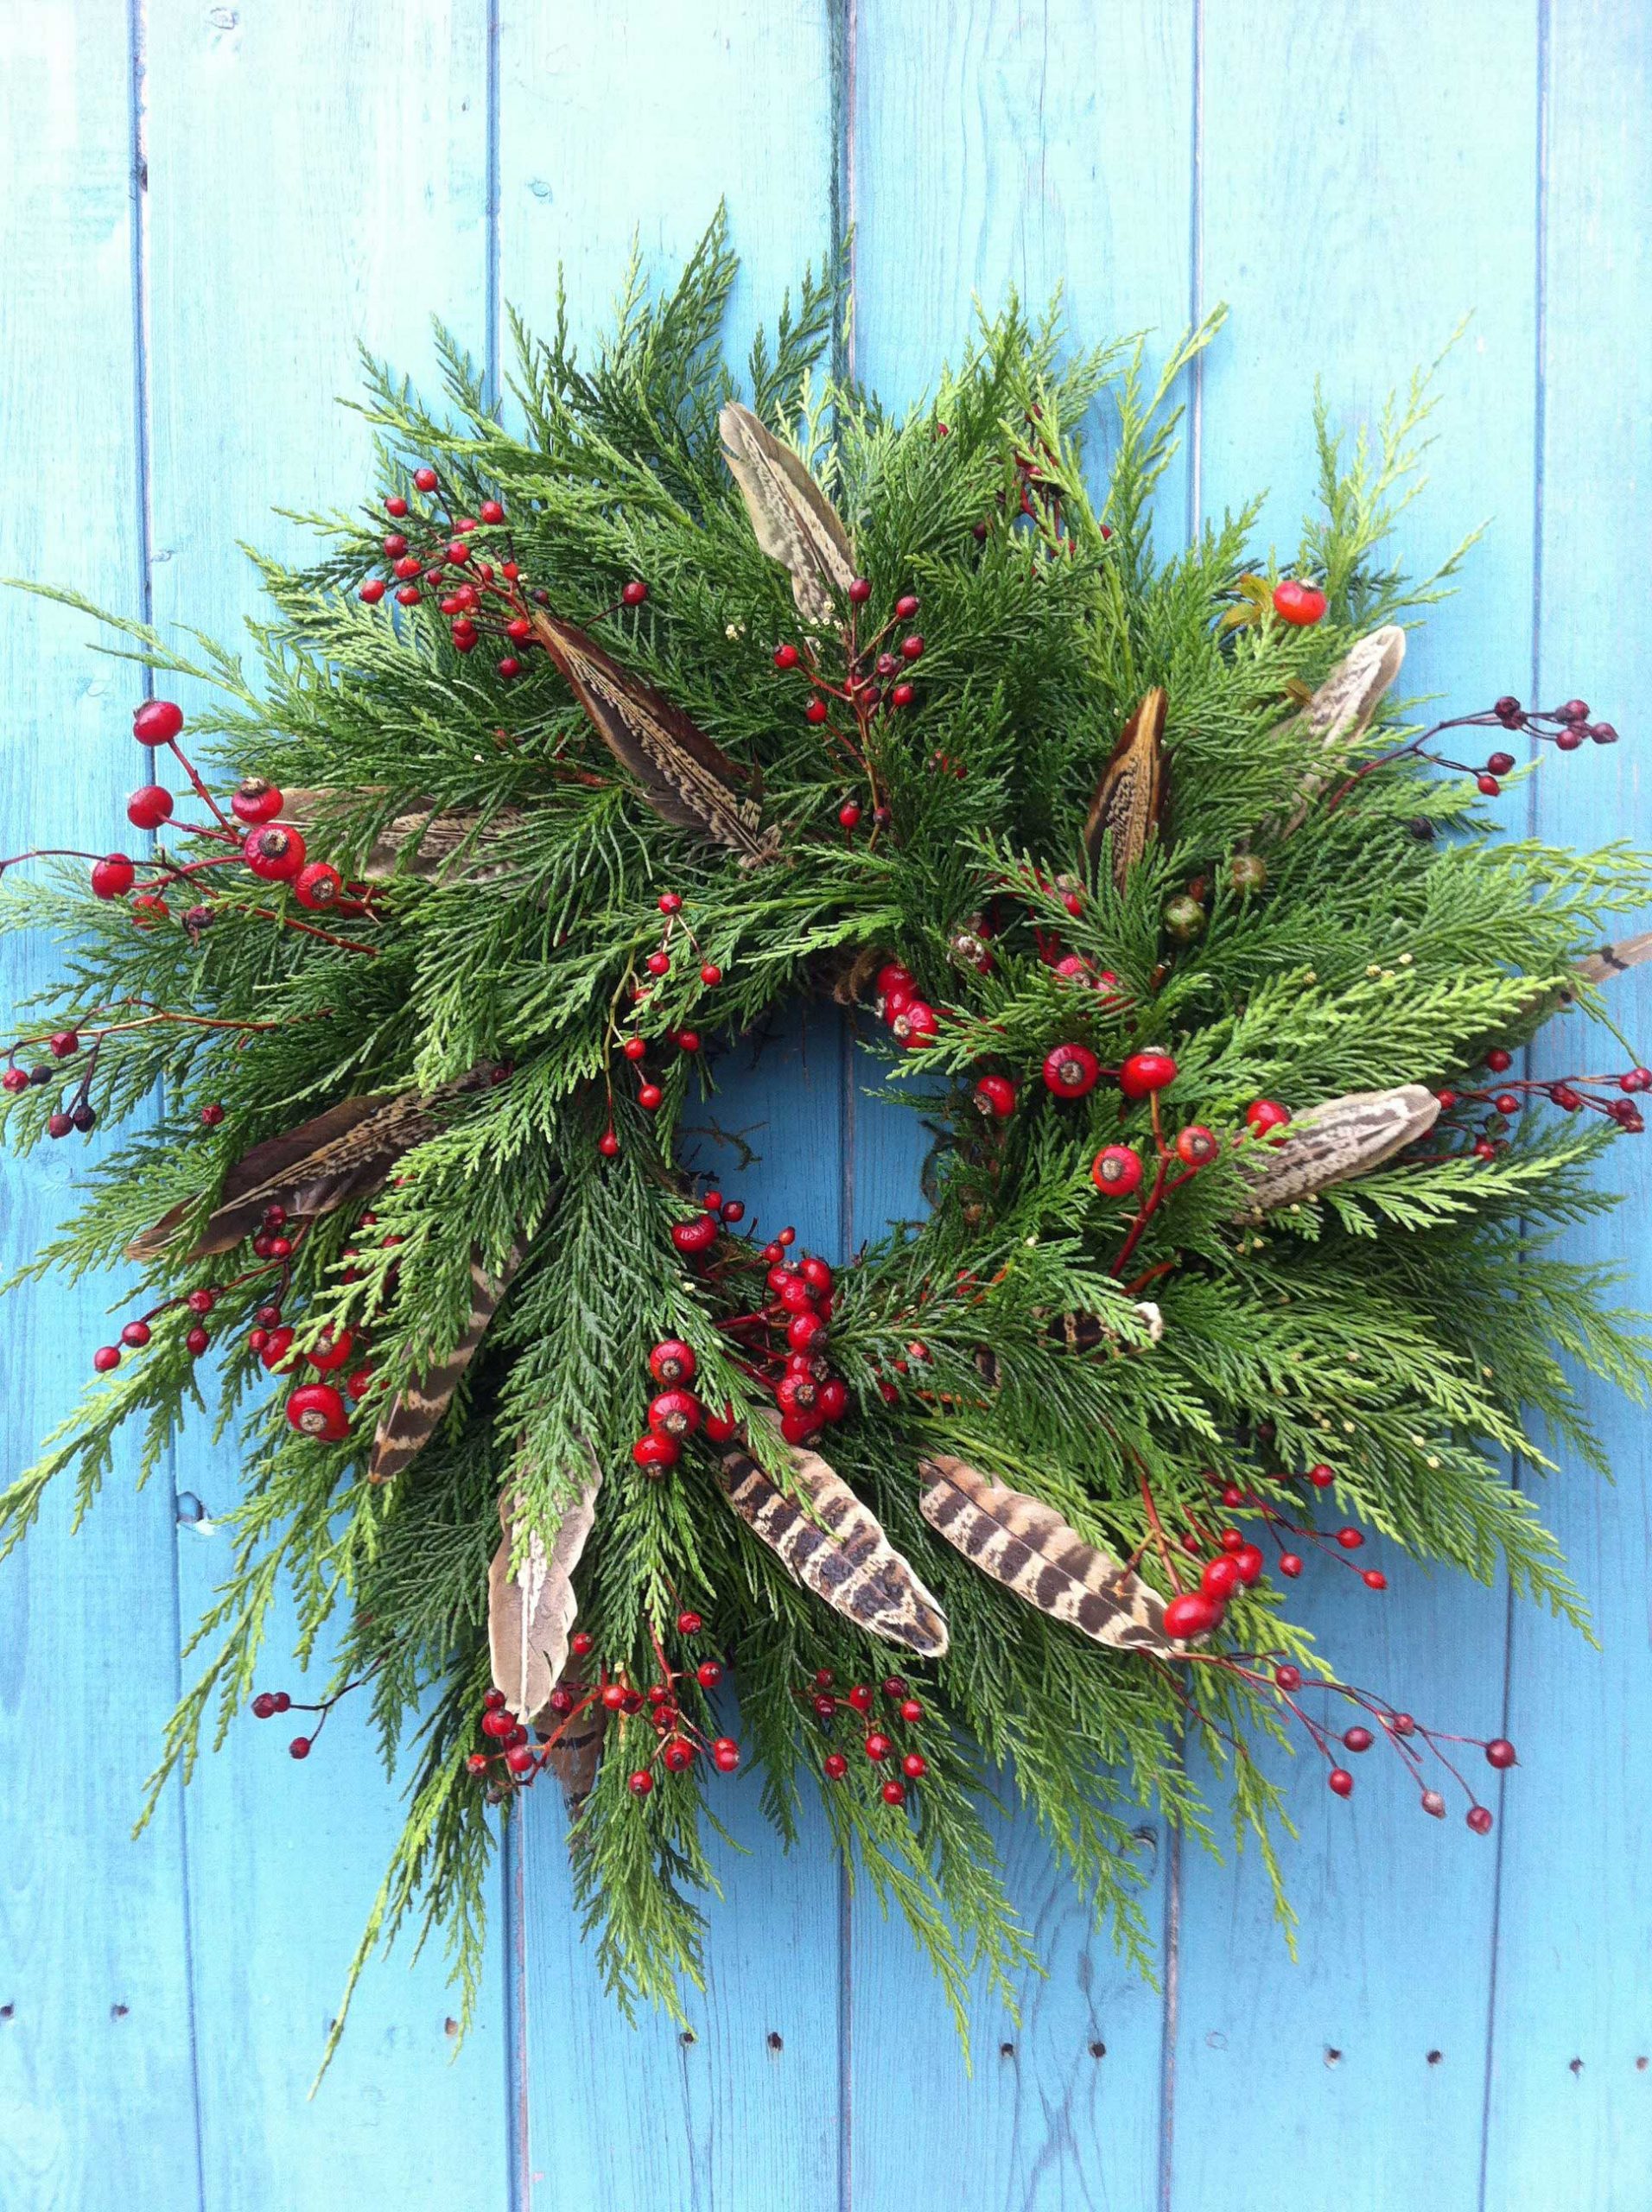 Christmas wreath - berries and feathers, by Zanna from S P I N D L E